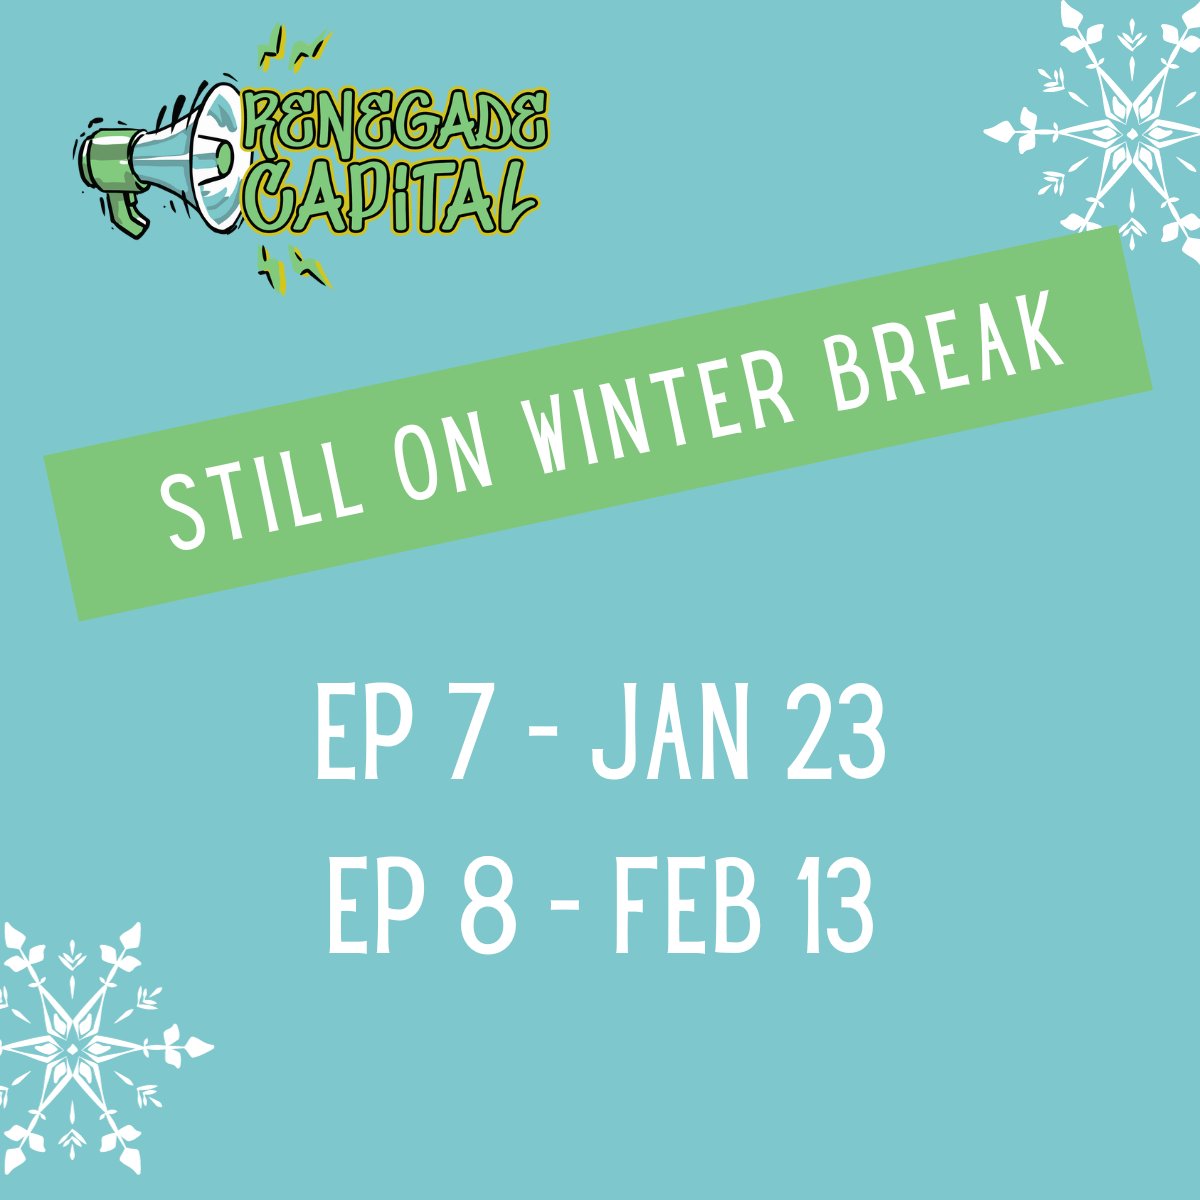 We're still on winter break, but we'll be back on Jan 23 with Episode 7! Stay tuned for more inspiring #renegade guests!